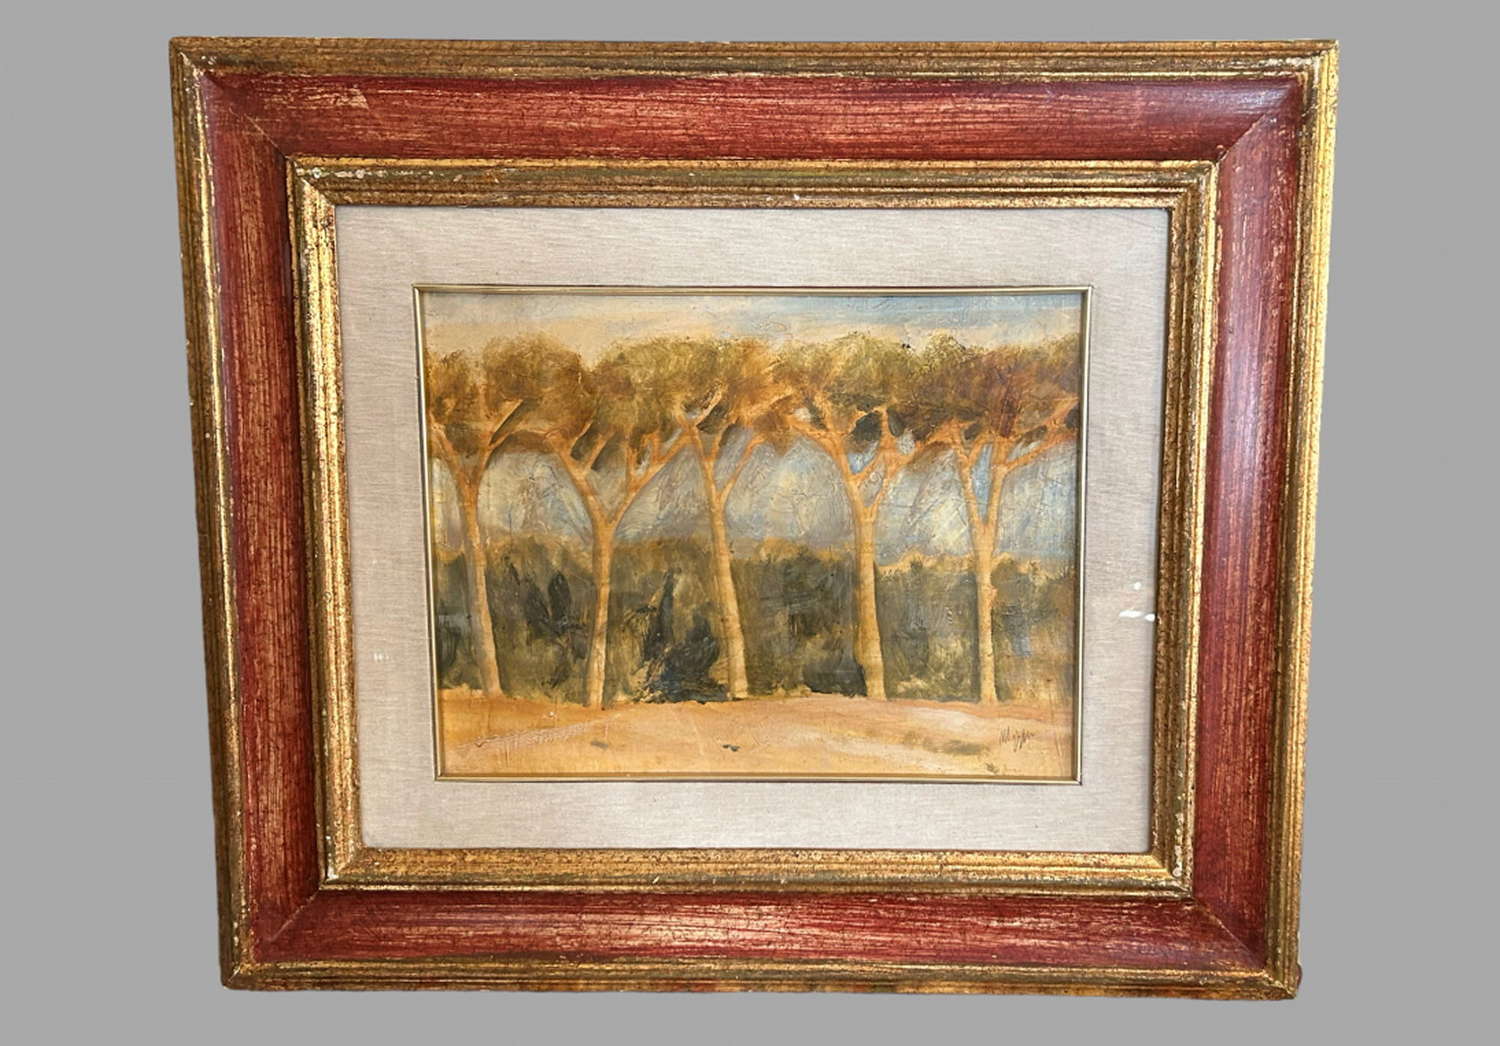 Attractive Impressionism Style Poplar Trees - Oil On Canvas